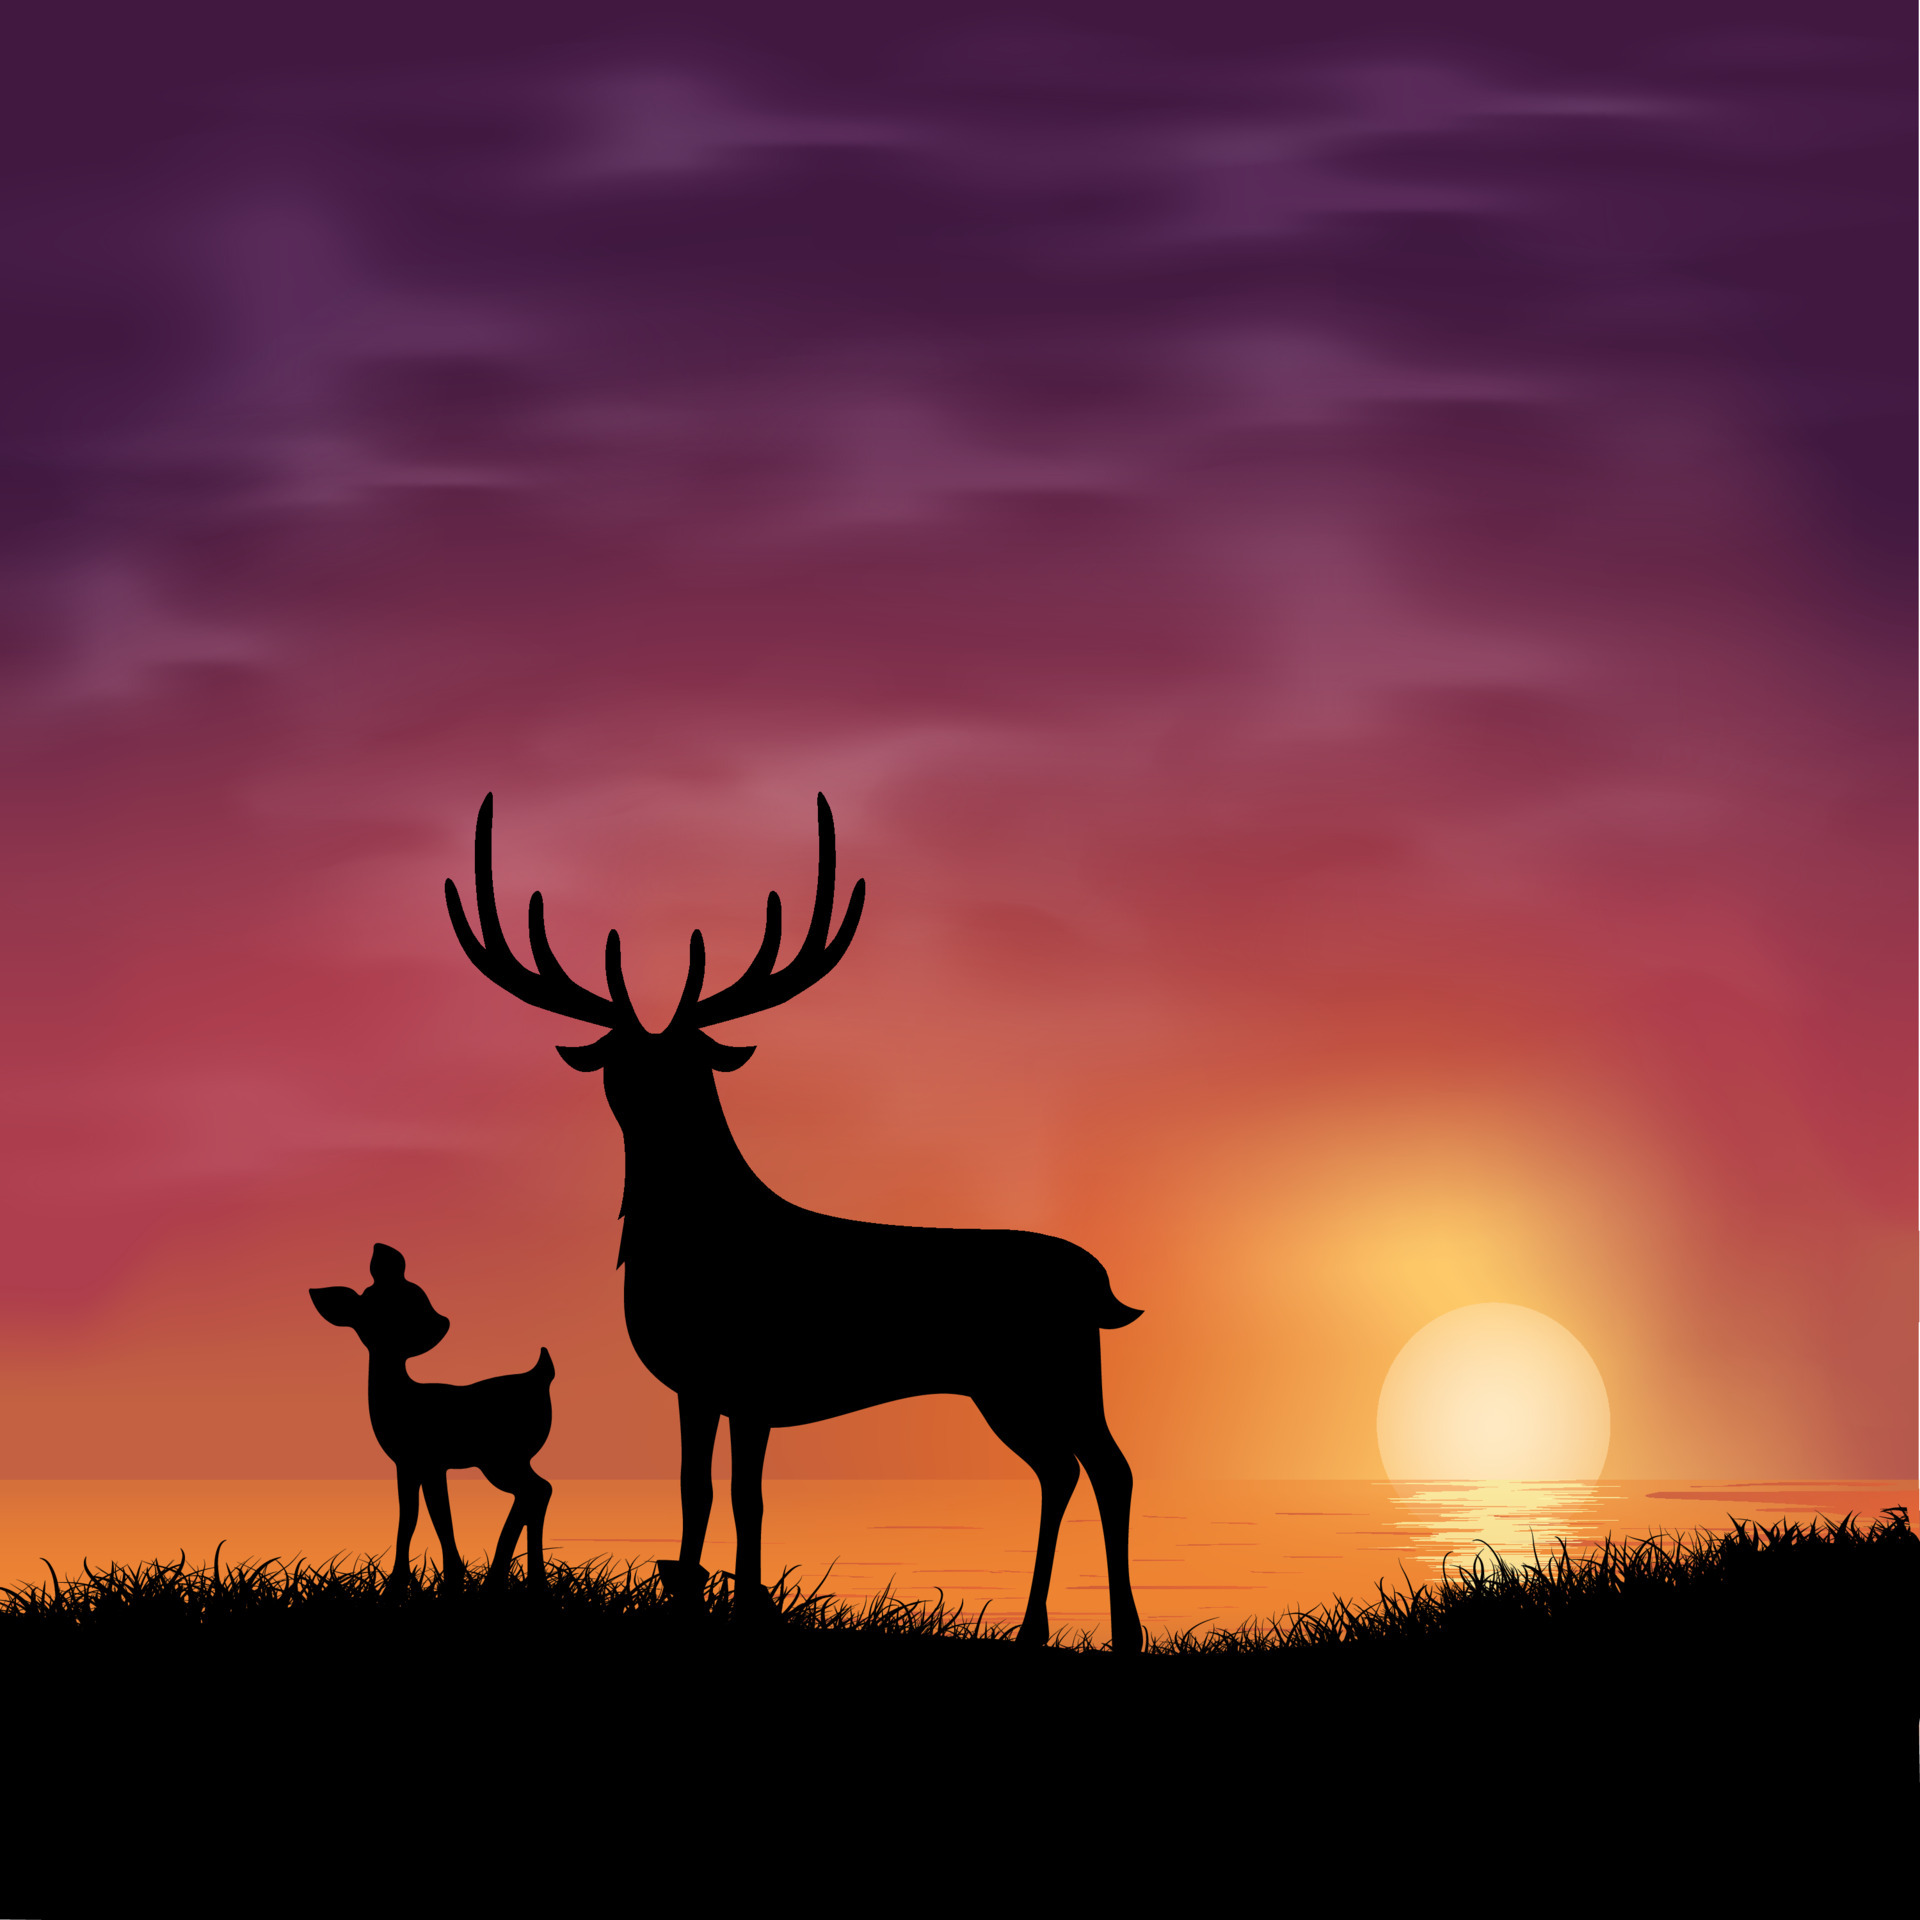 https://static.vecteezy.com/system/resources/previews/006/097/019/original/silhouette-of-deer-and-fawn-isolated-on-sunset-background-elegant-sunset-background-with-deer-and-fawn-illustration-free-vector.jpg